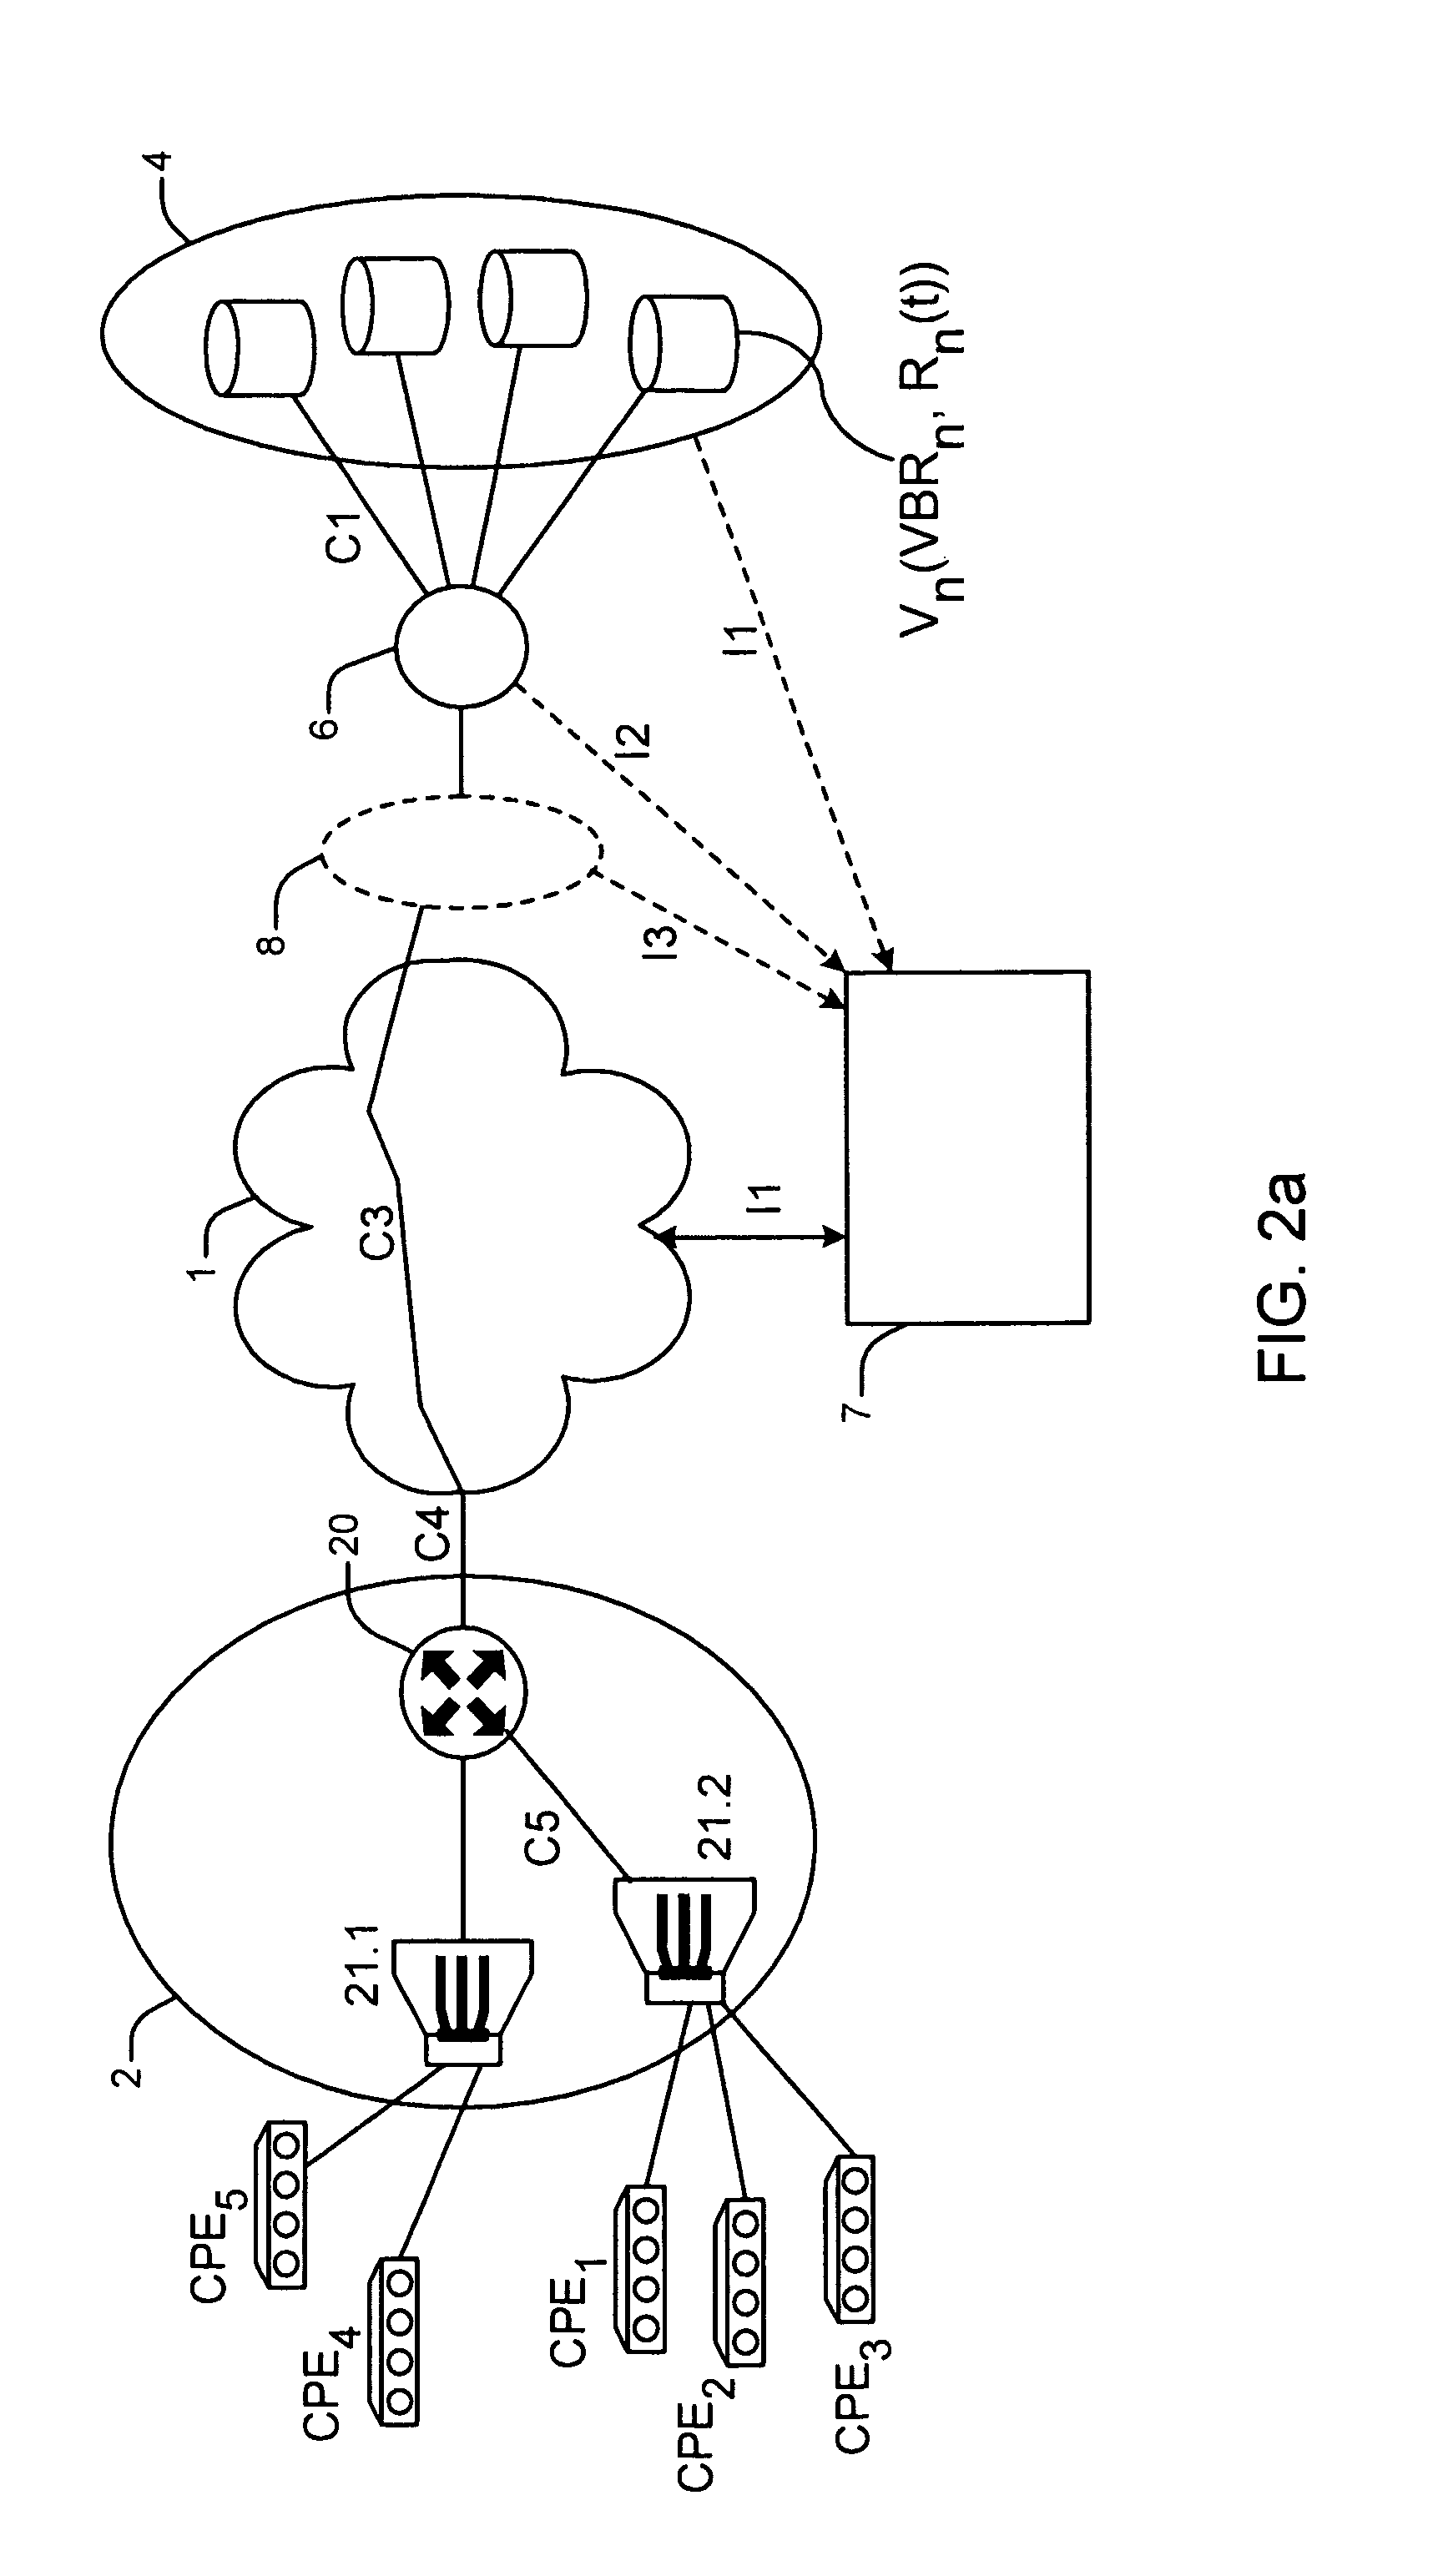 Method of managing requests for remote access to multimedia contents